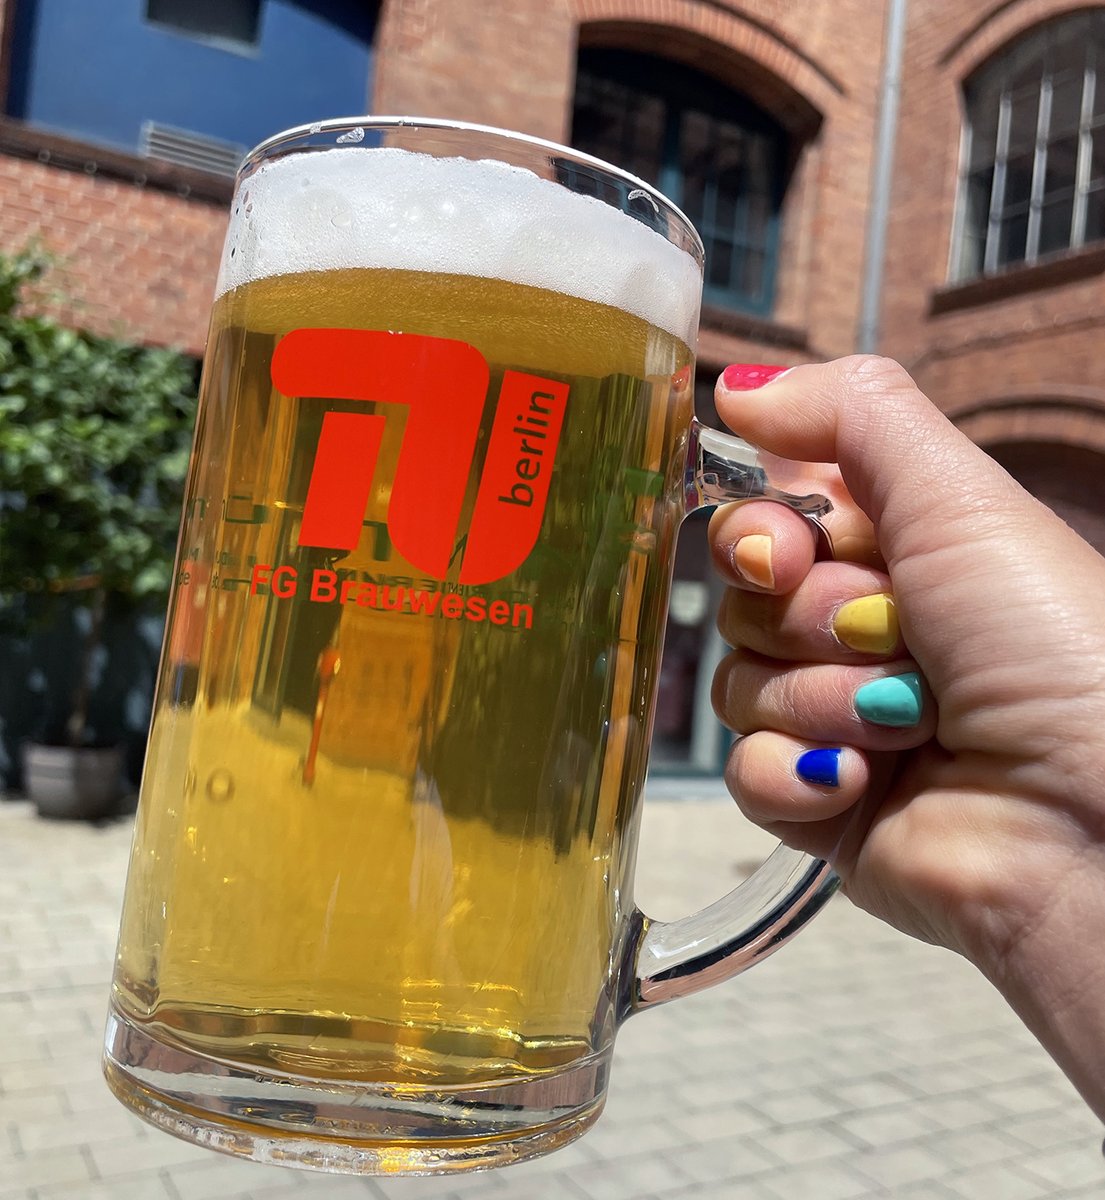 🌈🍻 Celebrating #PrideMonth with a cheers to diversity! 🌈🍺 Just like beer, diversity brings people together, creating a tapestry of experiences and stories. Let's raise our glasses to inclusivity, acceptance, and love! 🏳️‍🌈❤️ #CheersToDiversity #LoveIsLove